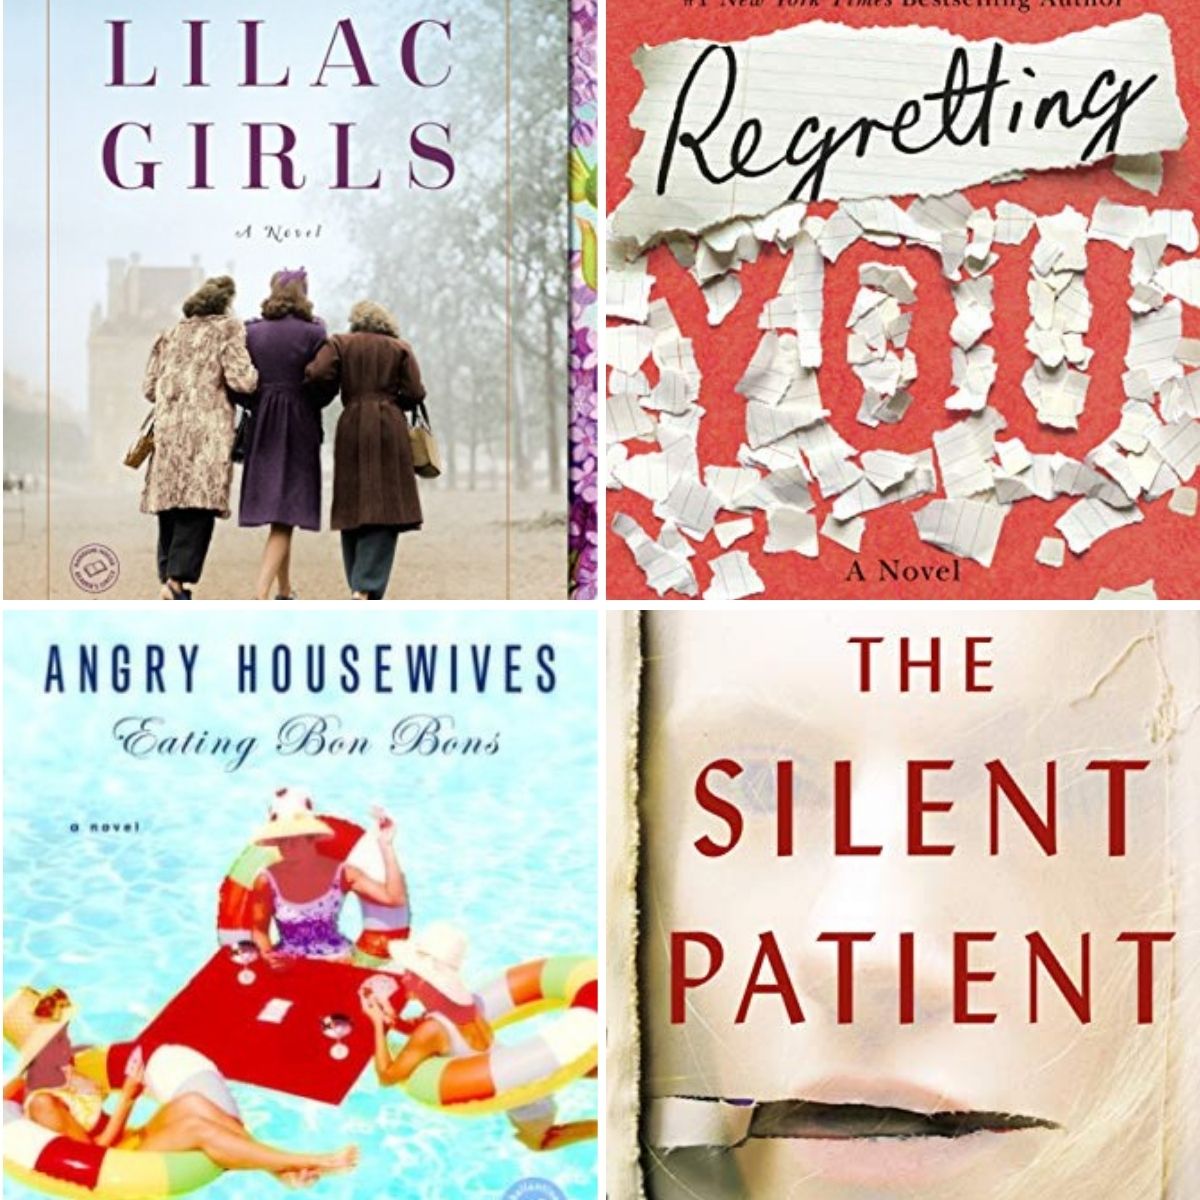 Collage of four book covers: Lilac Girls, Angry Housewives Eating Bon Bons, Regretting You, and The Silent Patient.